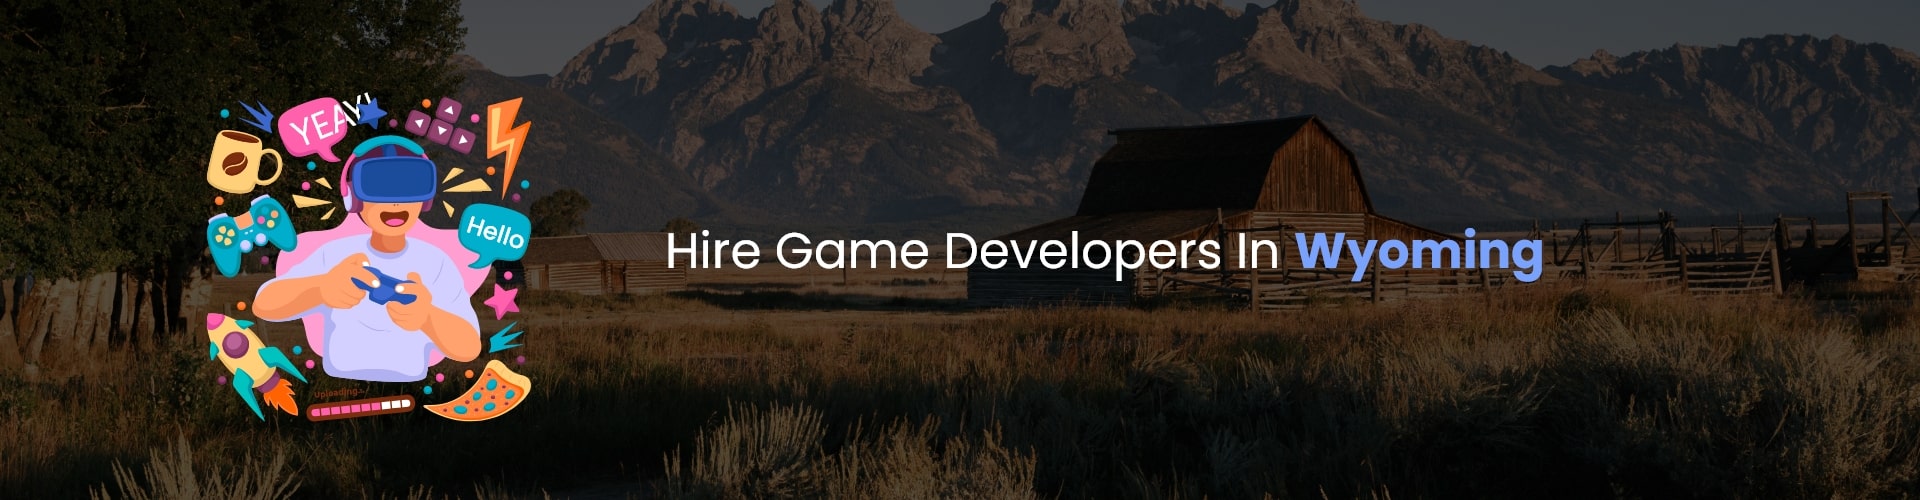 hire game developers in wyoming